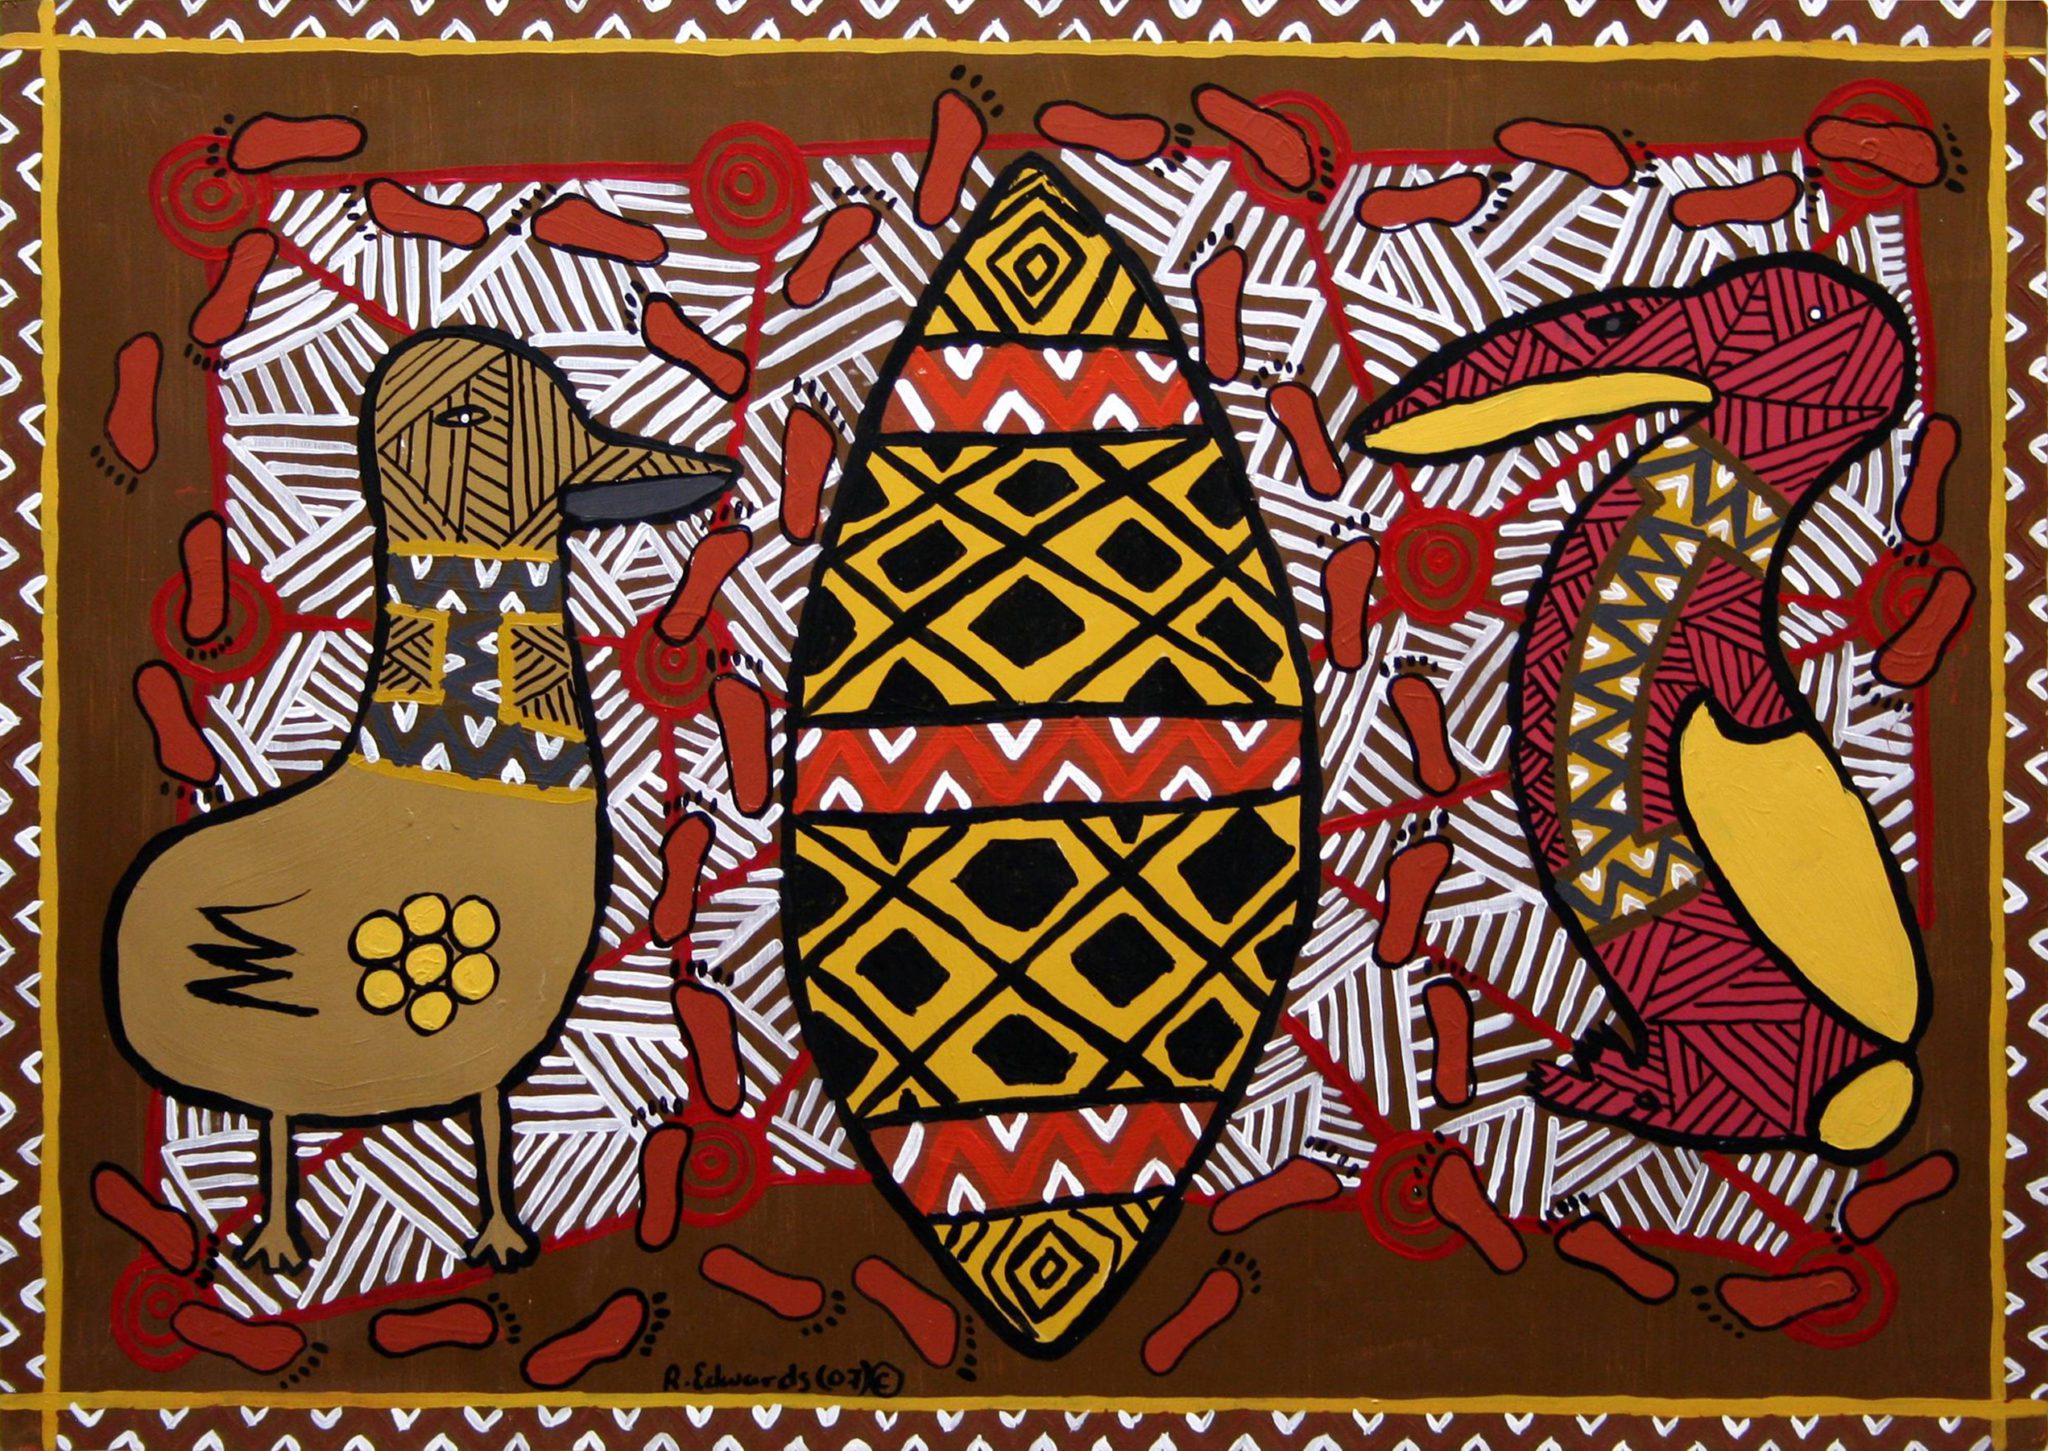 Ronald Edwards-Pepper, Boorun and Tuk, Dreamtime of Aboriginal People of Gippsland, 2007, Acrylic on paper, 64 x 88 cm, Latrobe Regional Gallery Collection, purchased 2007.